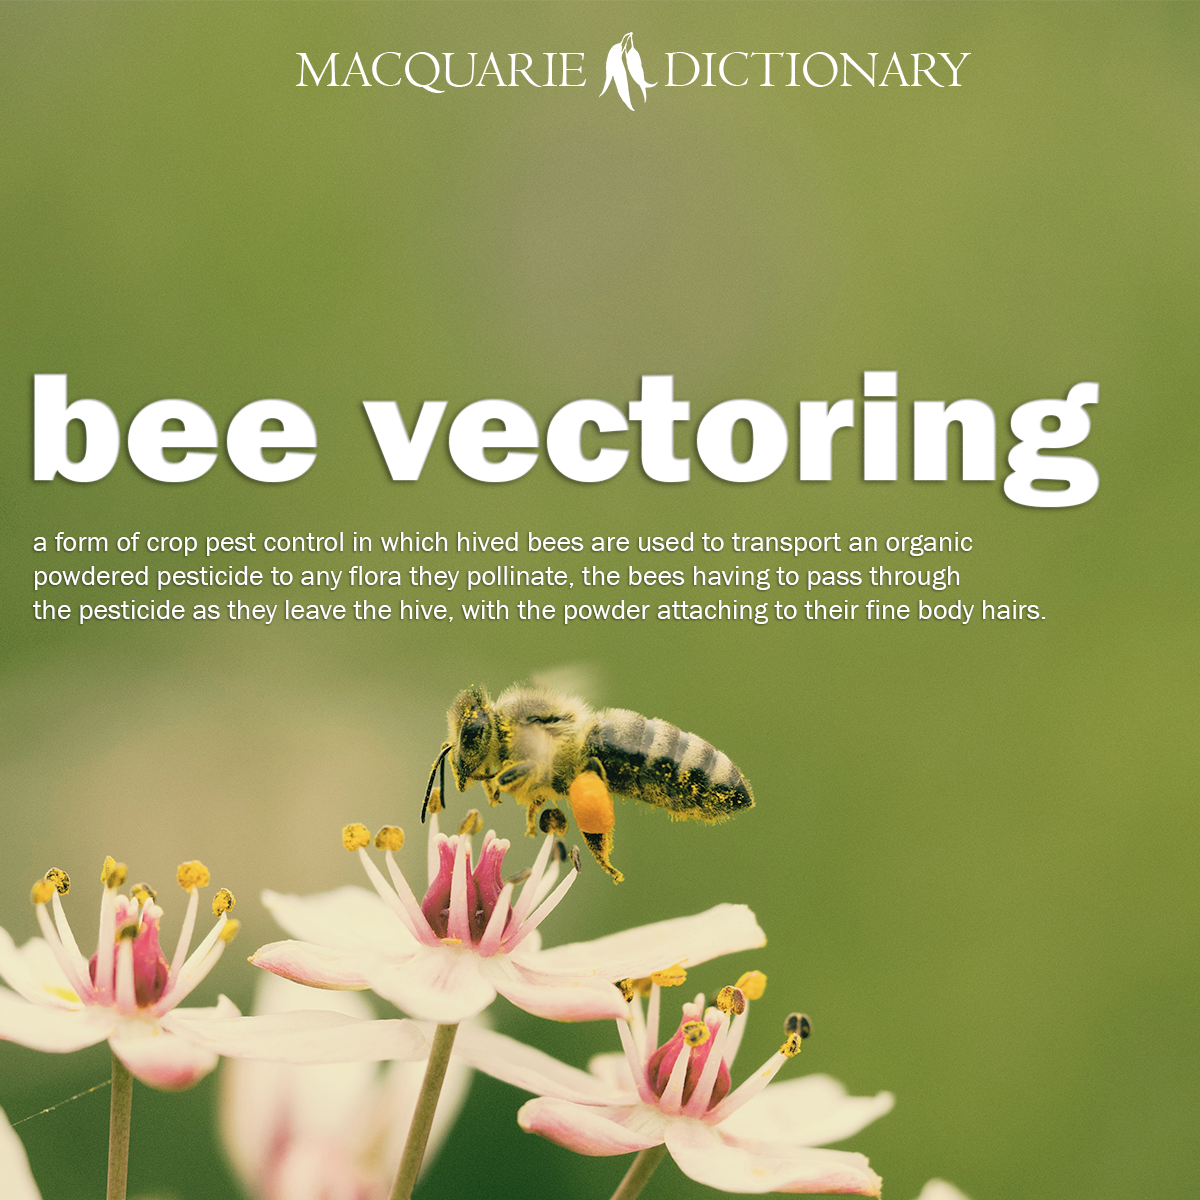 bee vectoring - a form of crop pest control in which hived bees are used to transport an organic powdered pesticide to any flora they pollinate, the bees having to pass through the pesticide as they leave the hive, with the powder attaching to their fine body hairs.